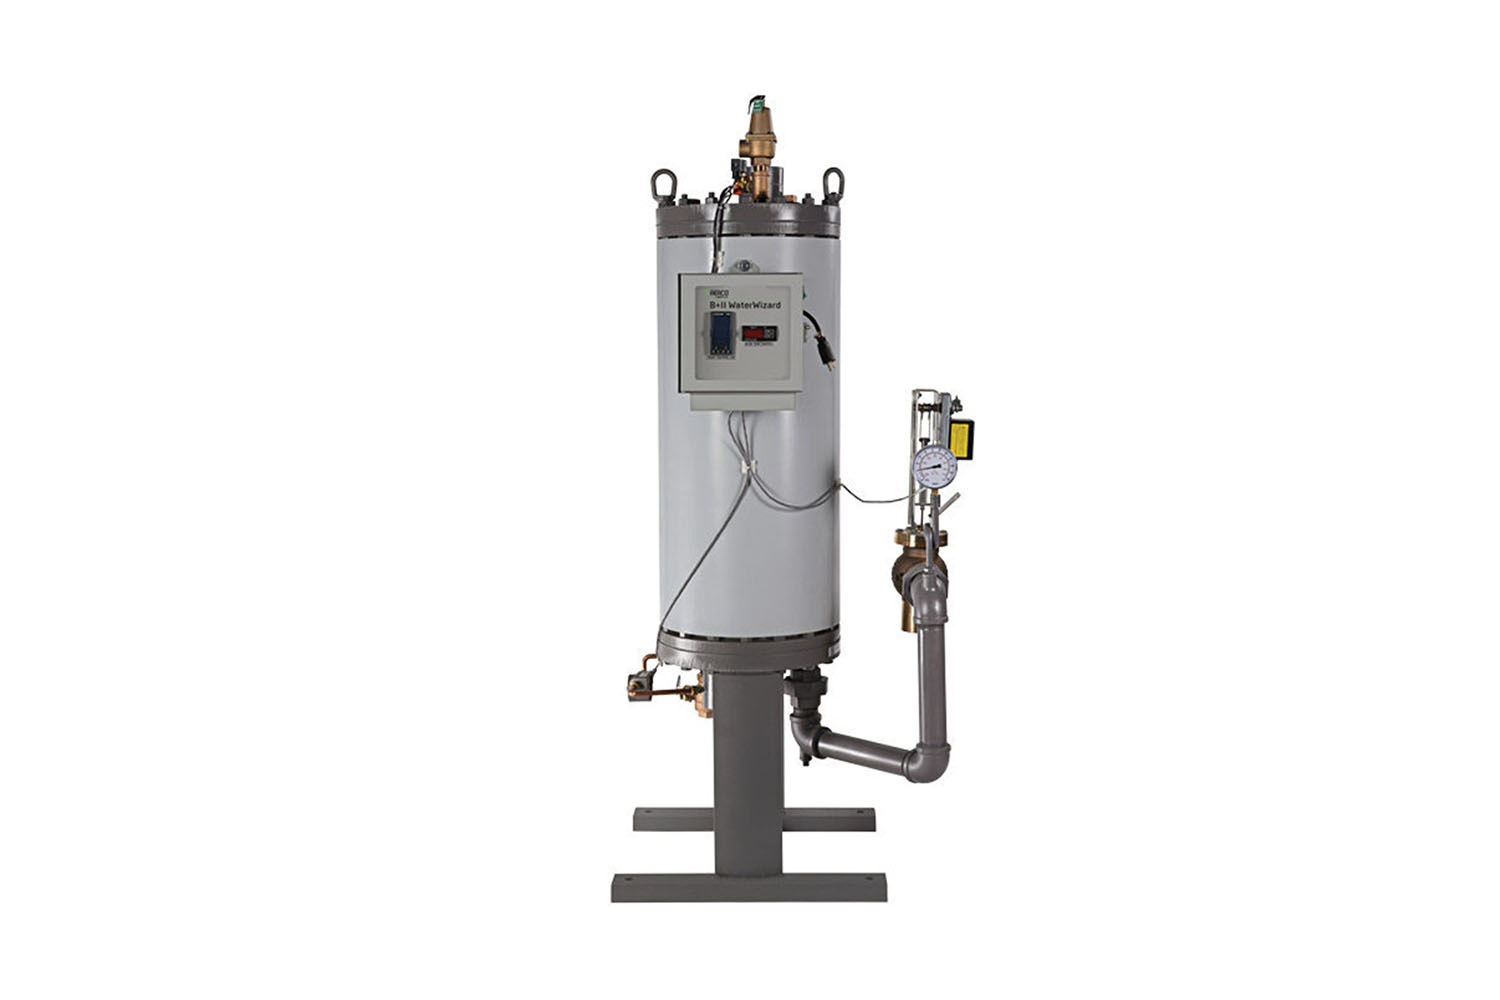 Indirect Steam-to-Water Heaters